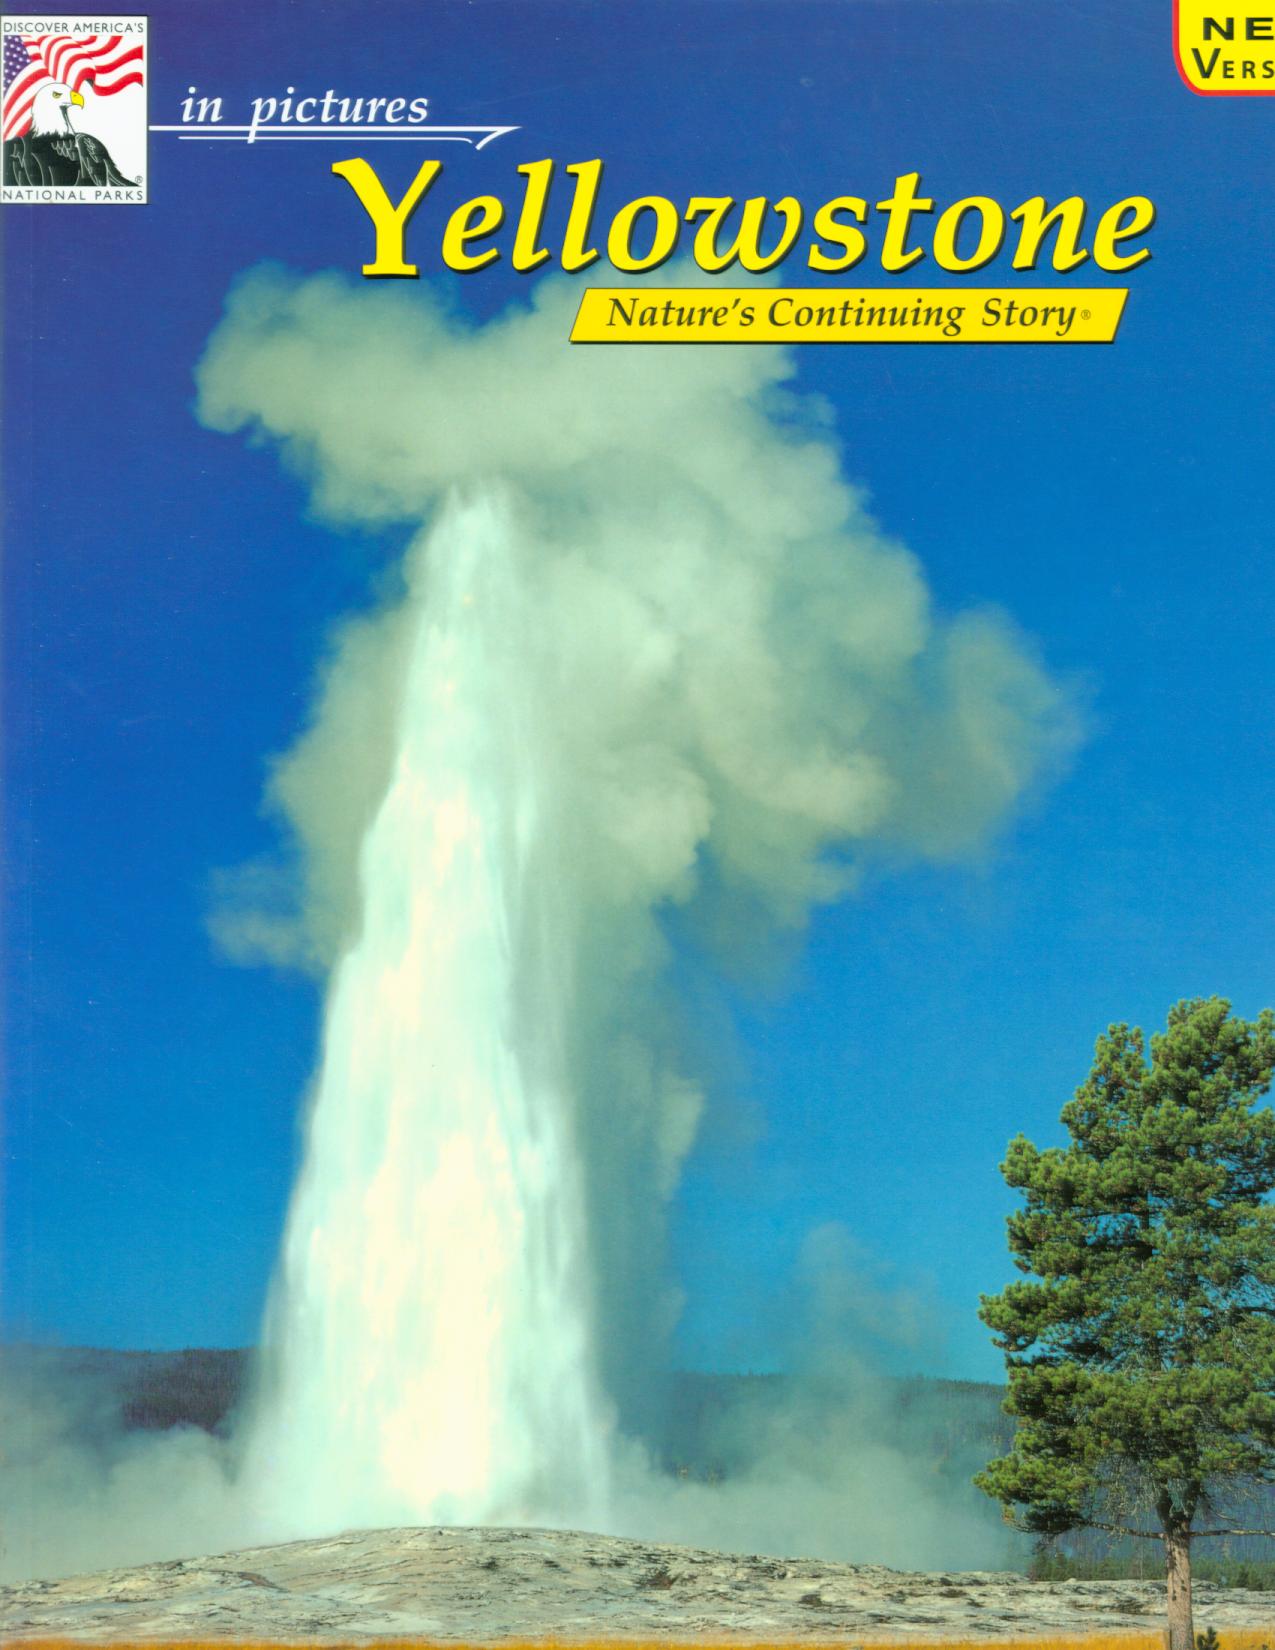 YELLOWSTONE IN PICTURES: Nature's continuing story (MT/WY/ID).